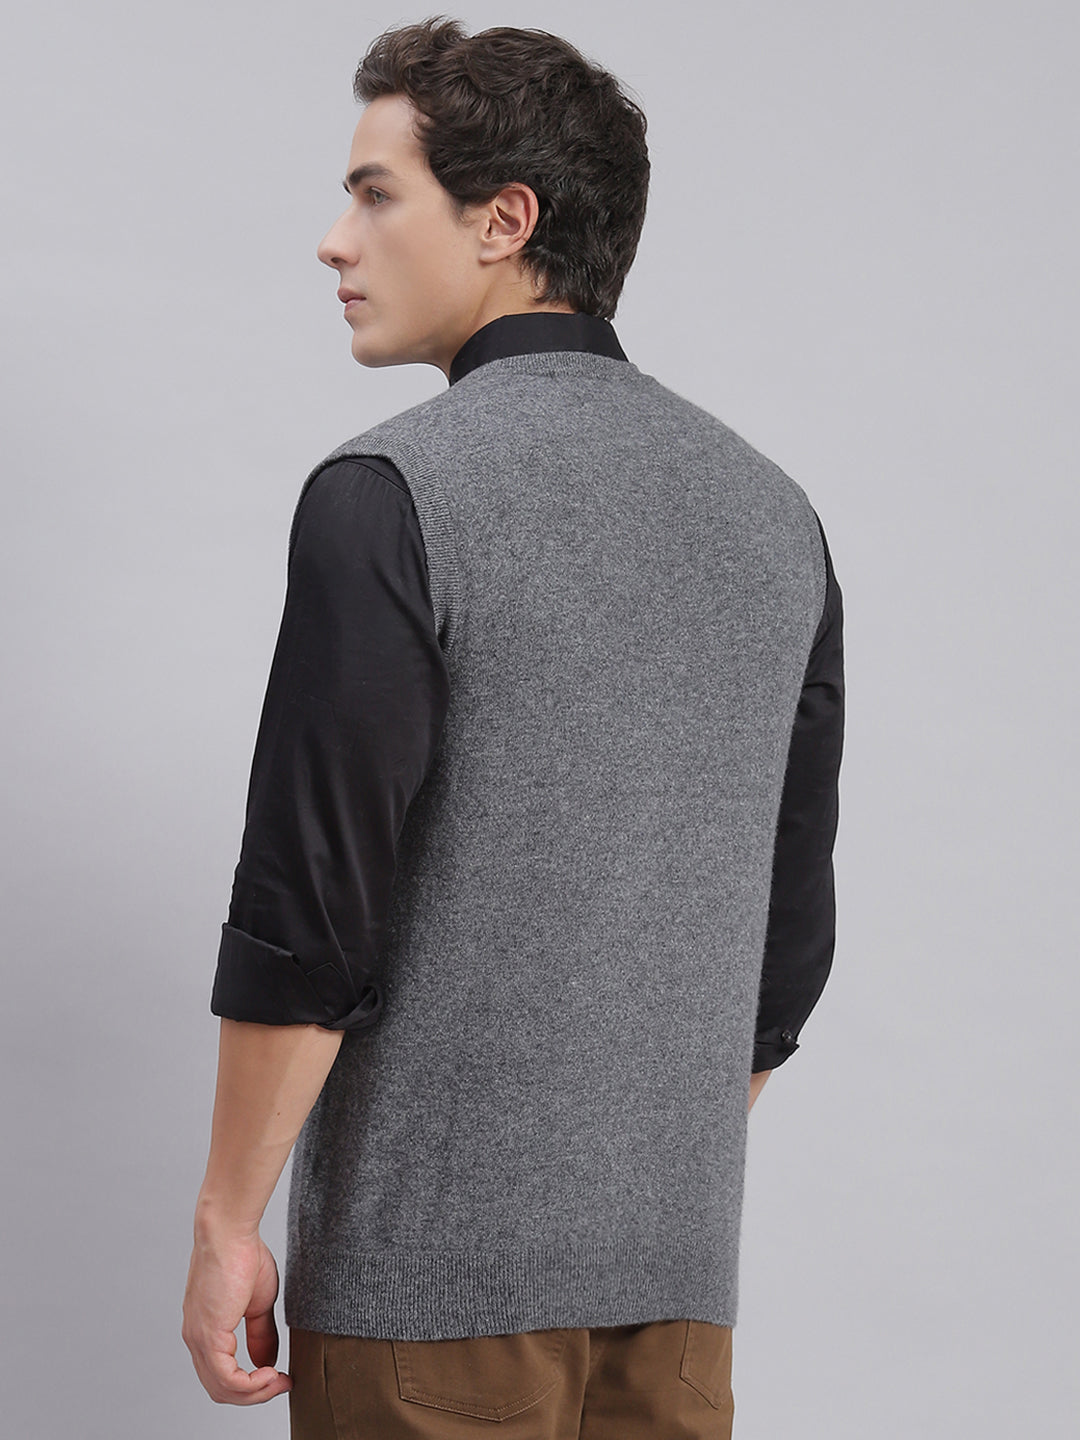 Men Grey Solid V Neck Sleeveless Sweaters/Pullovers